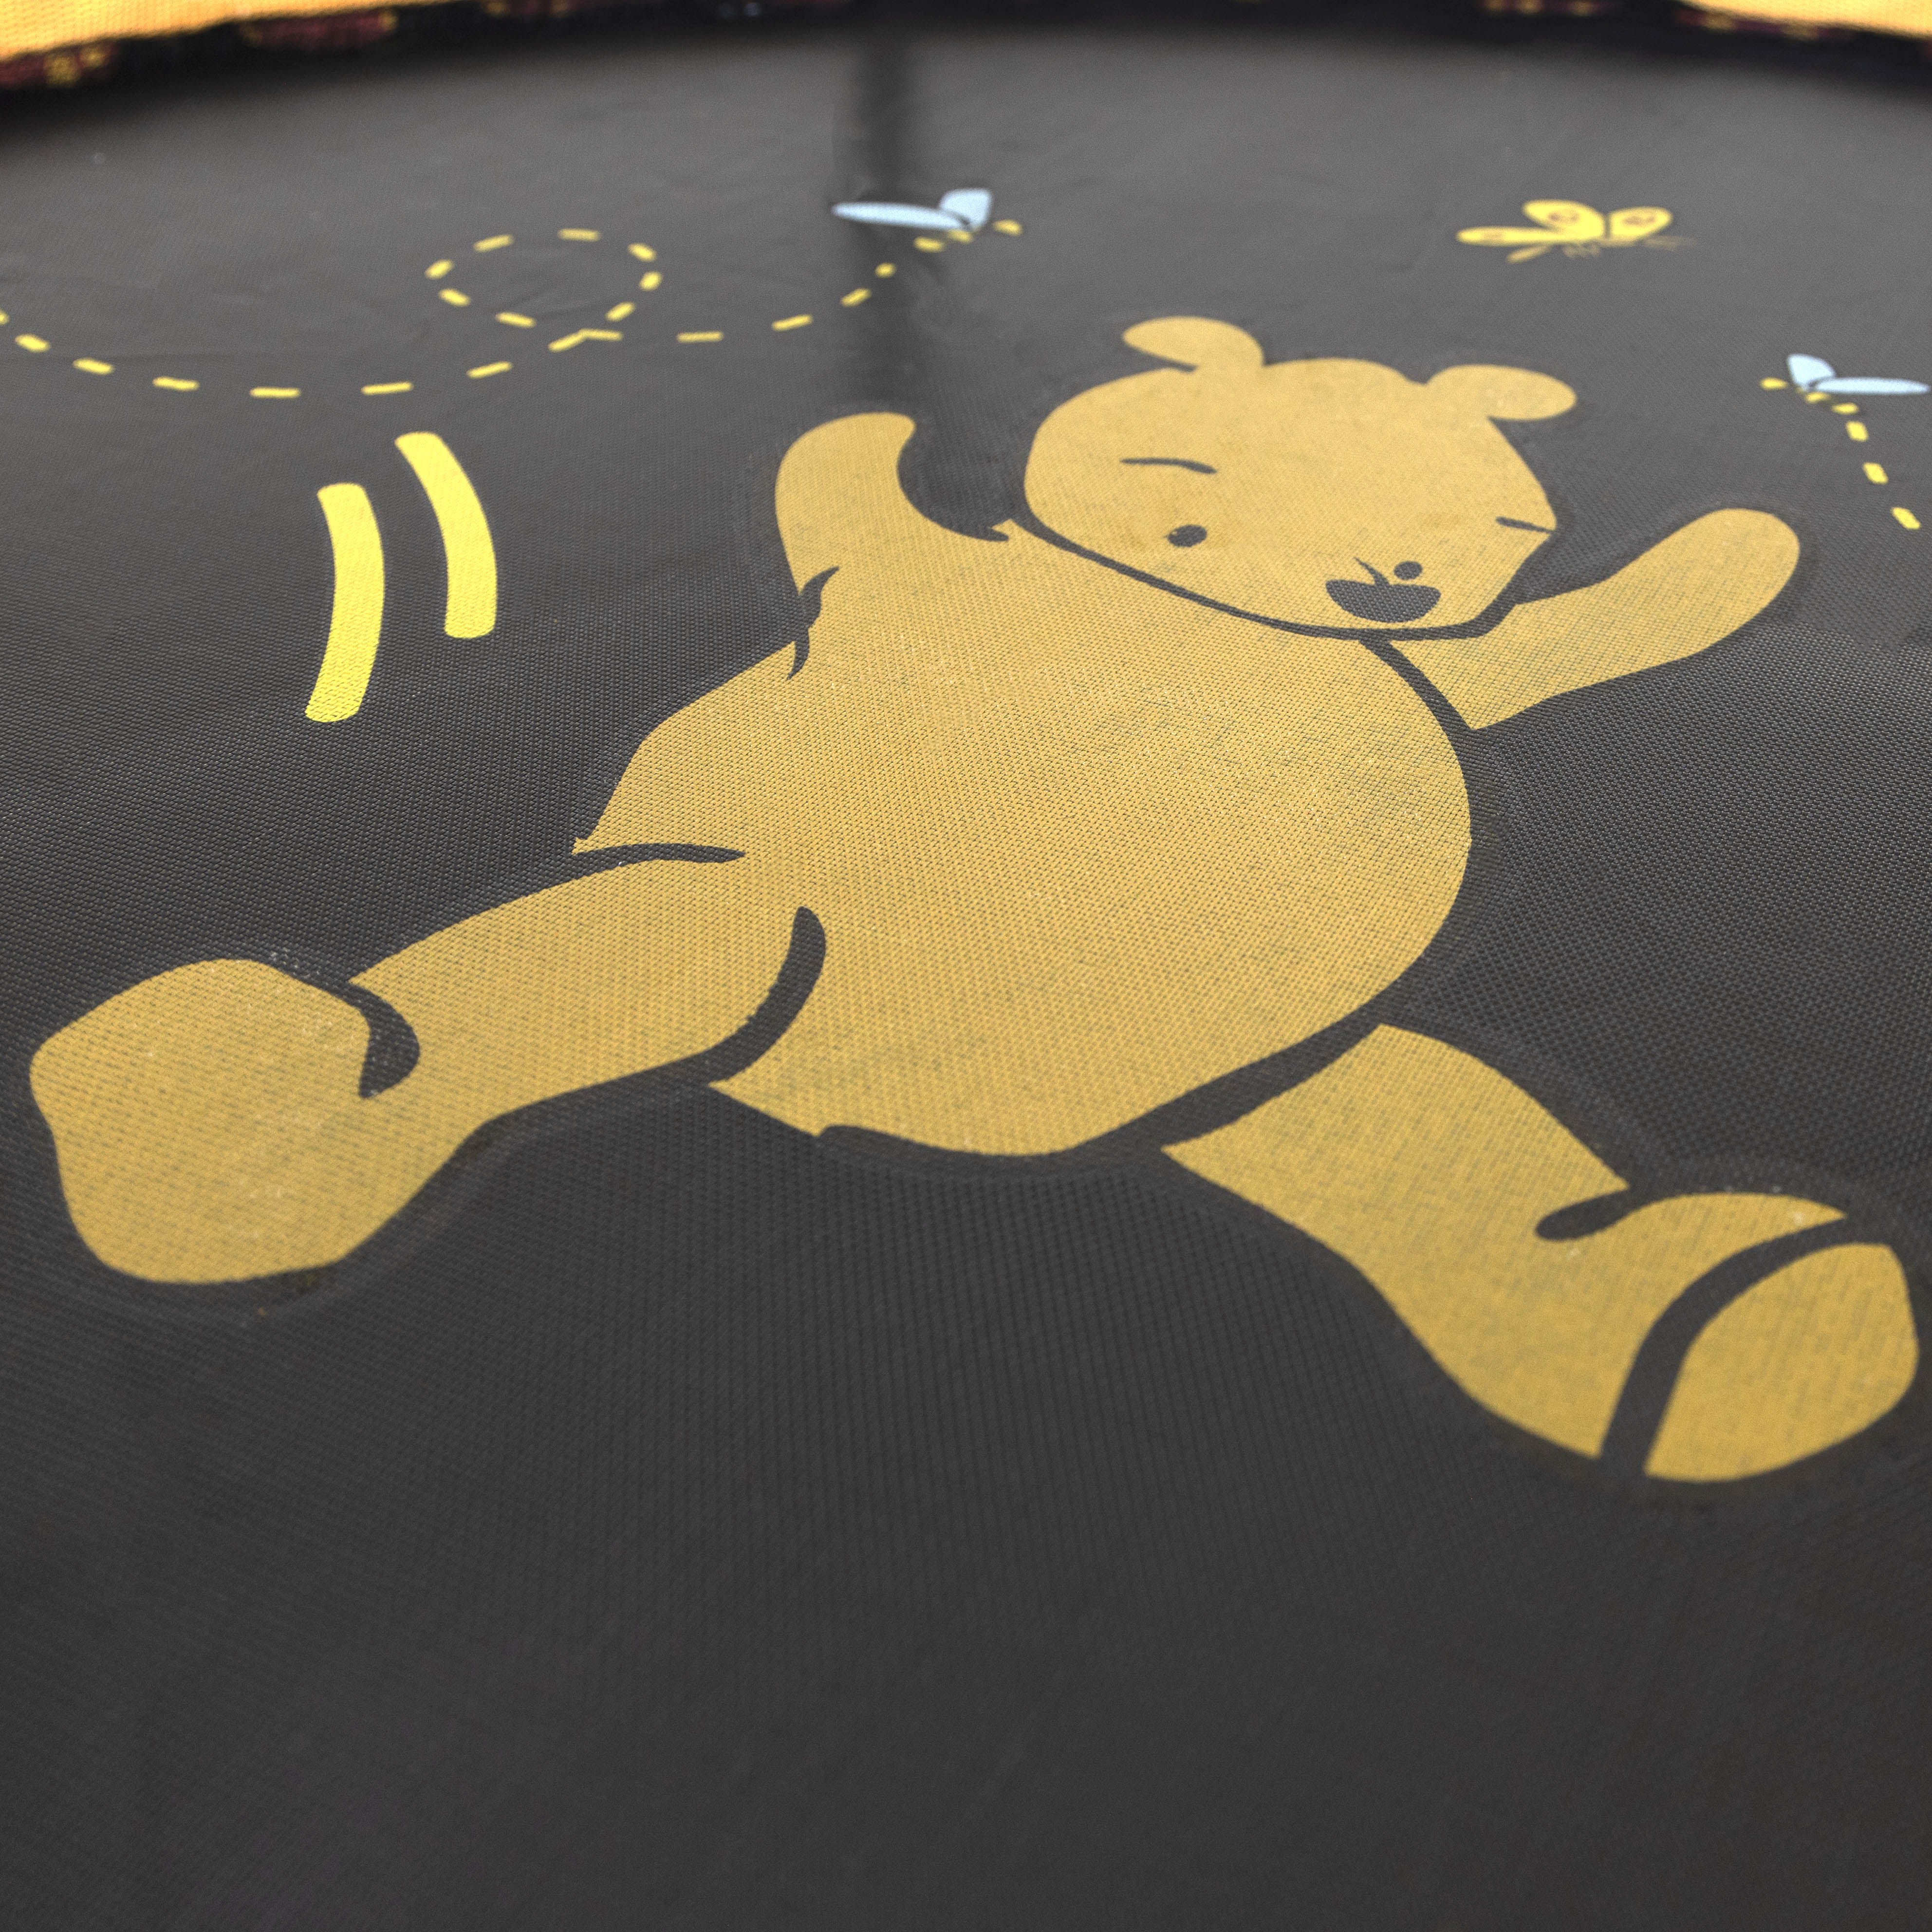 The vintage Winnie the Pooh is printed on the jump mat with honeybees and butterflies surrounding it. 